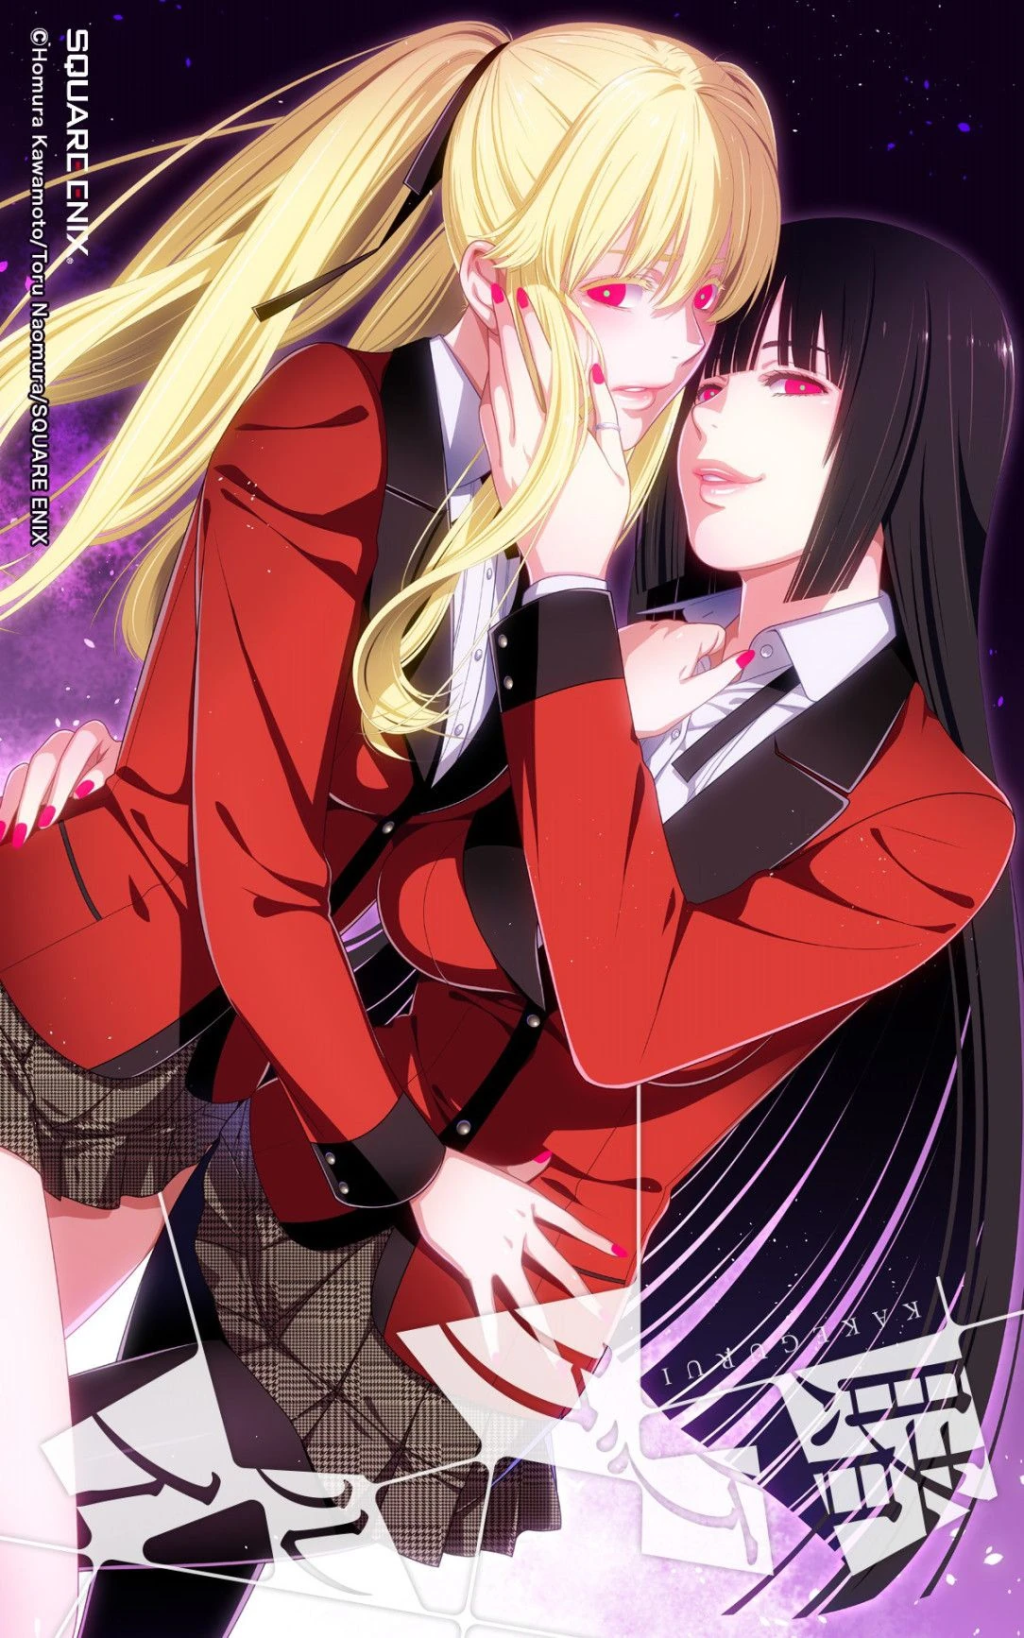 Yumeko and Mary let their compulsions run loose on Tōru Naomura's cover page to Kakegurui - Compulsive Gambler Chapter 5 "The Girl Who Is Now A Housepet" (2014), Square Enix